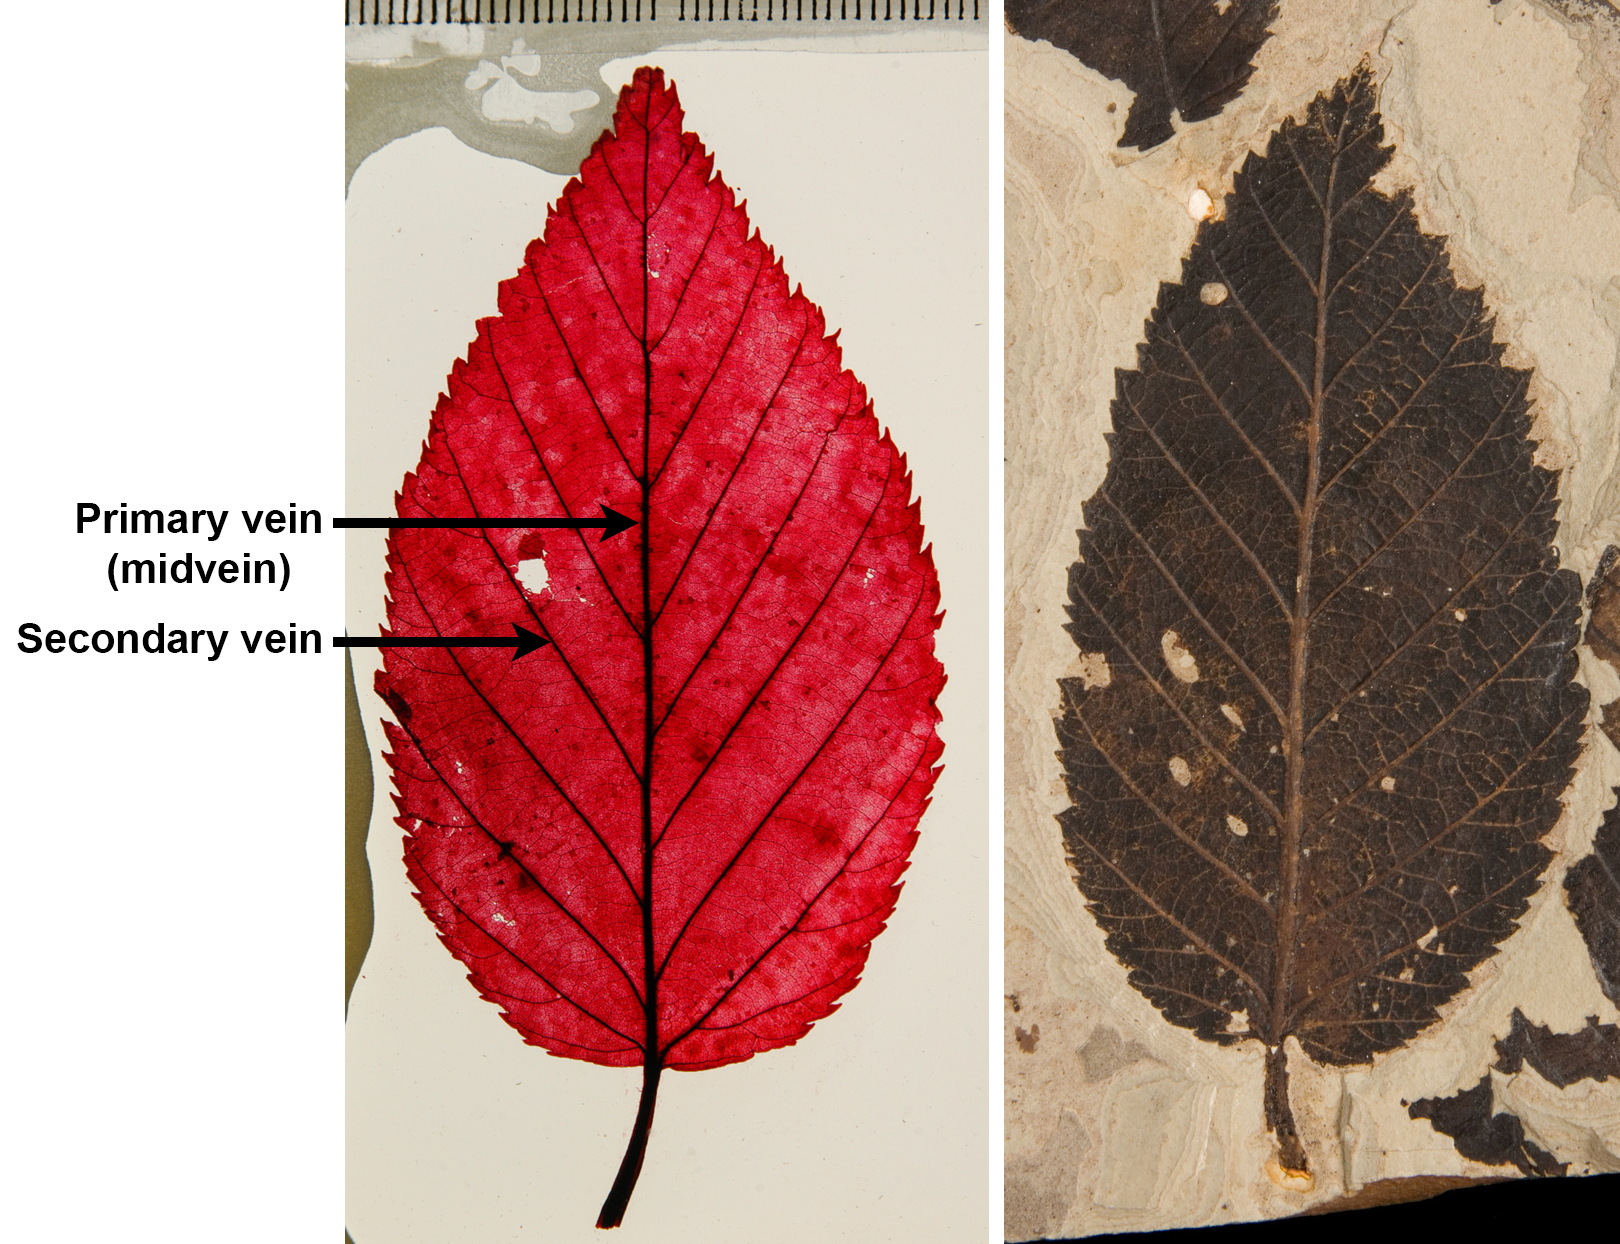 2-Panel figure. Panel 1: Cleared birch leaf with pinnate venation and straight secondary veins. Panel 2: Fossil birch leaf with pinnate venation and straight secondary veins.